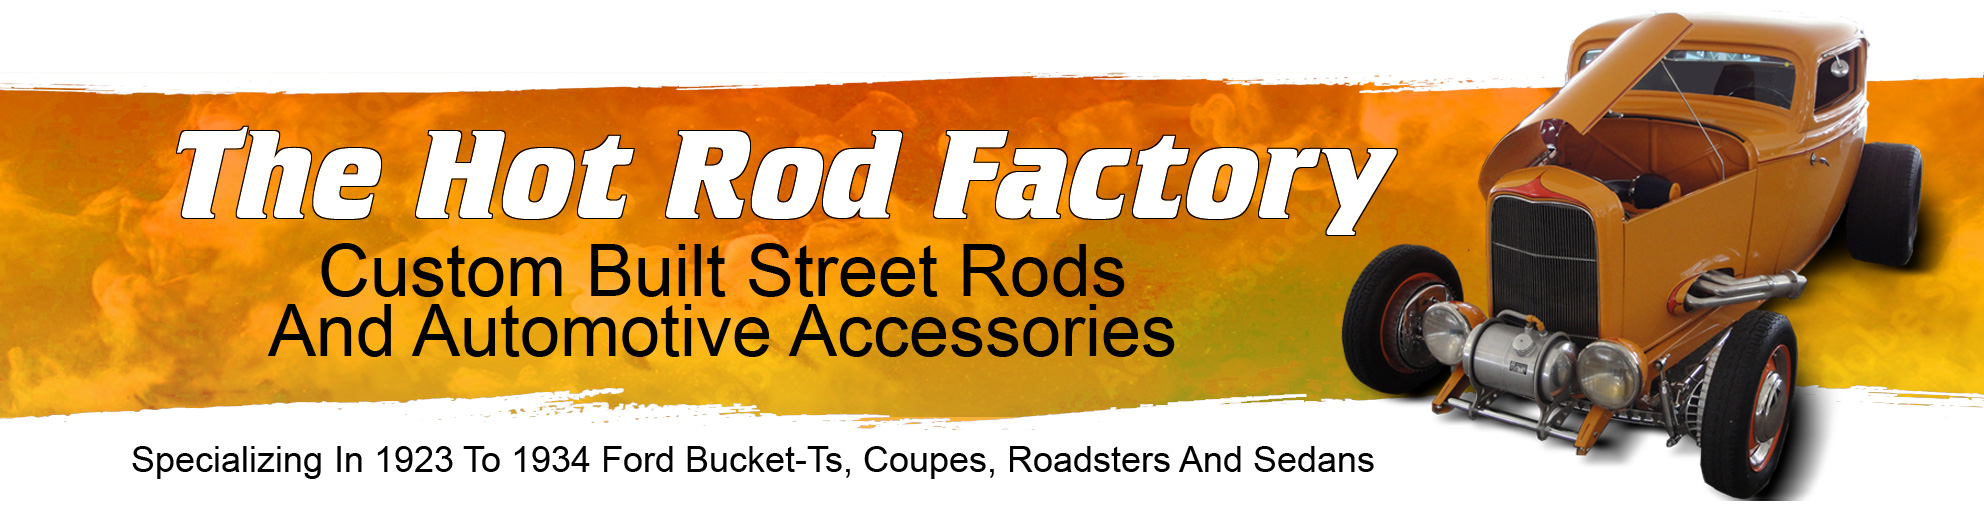 the hot rod factory